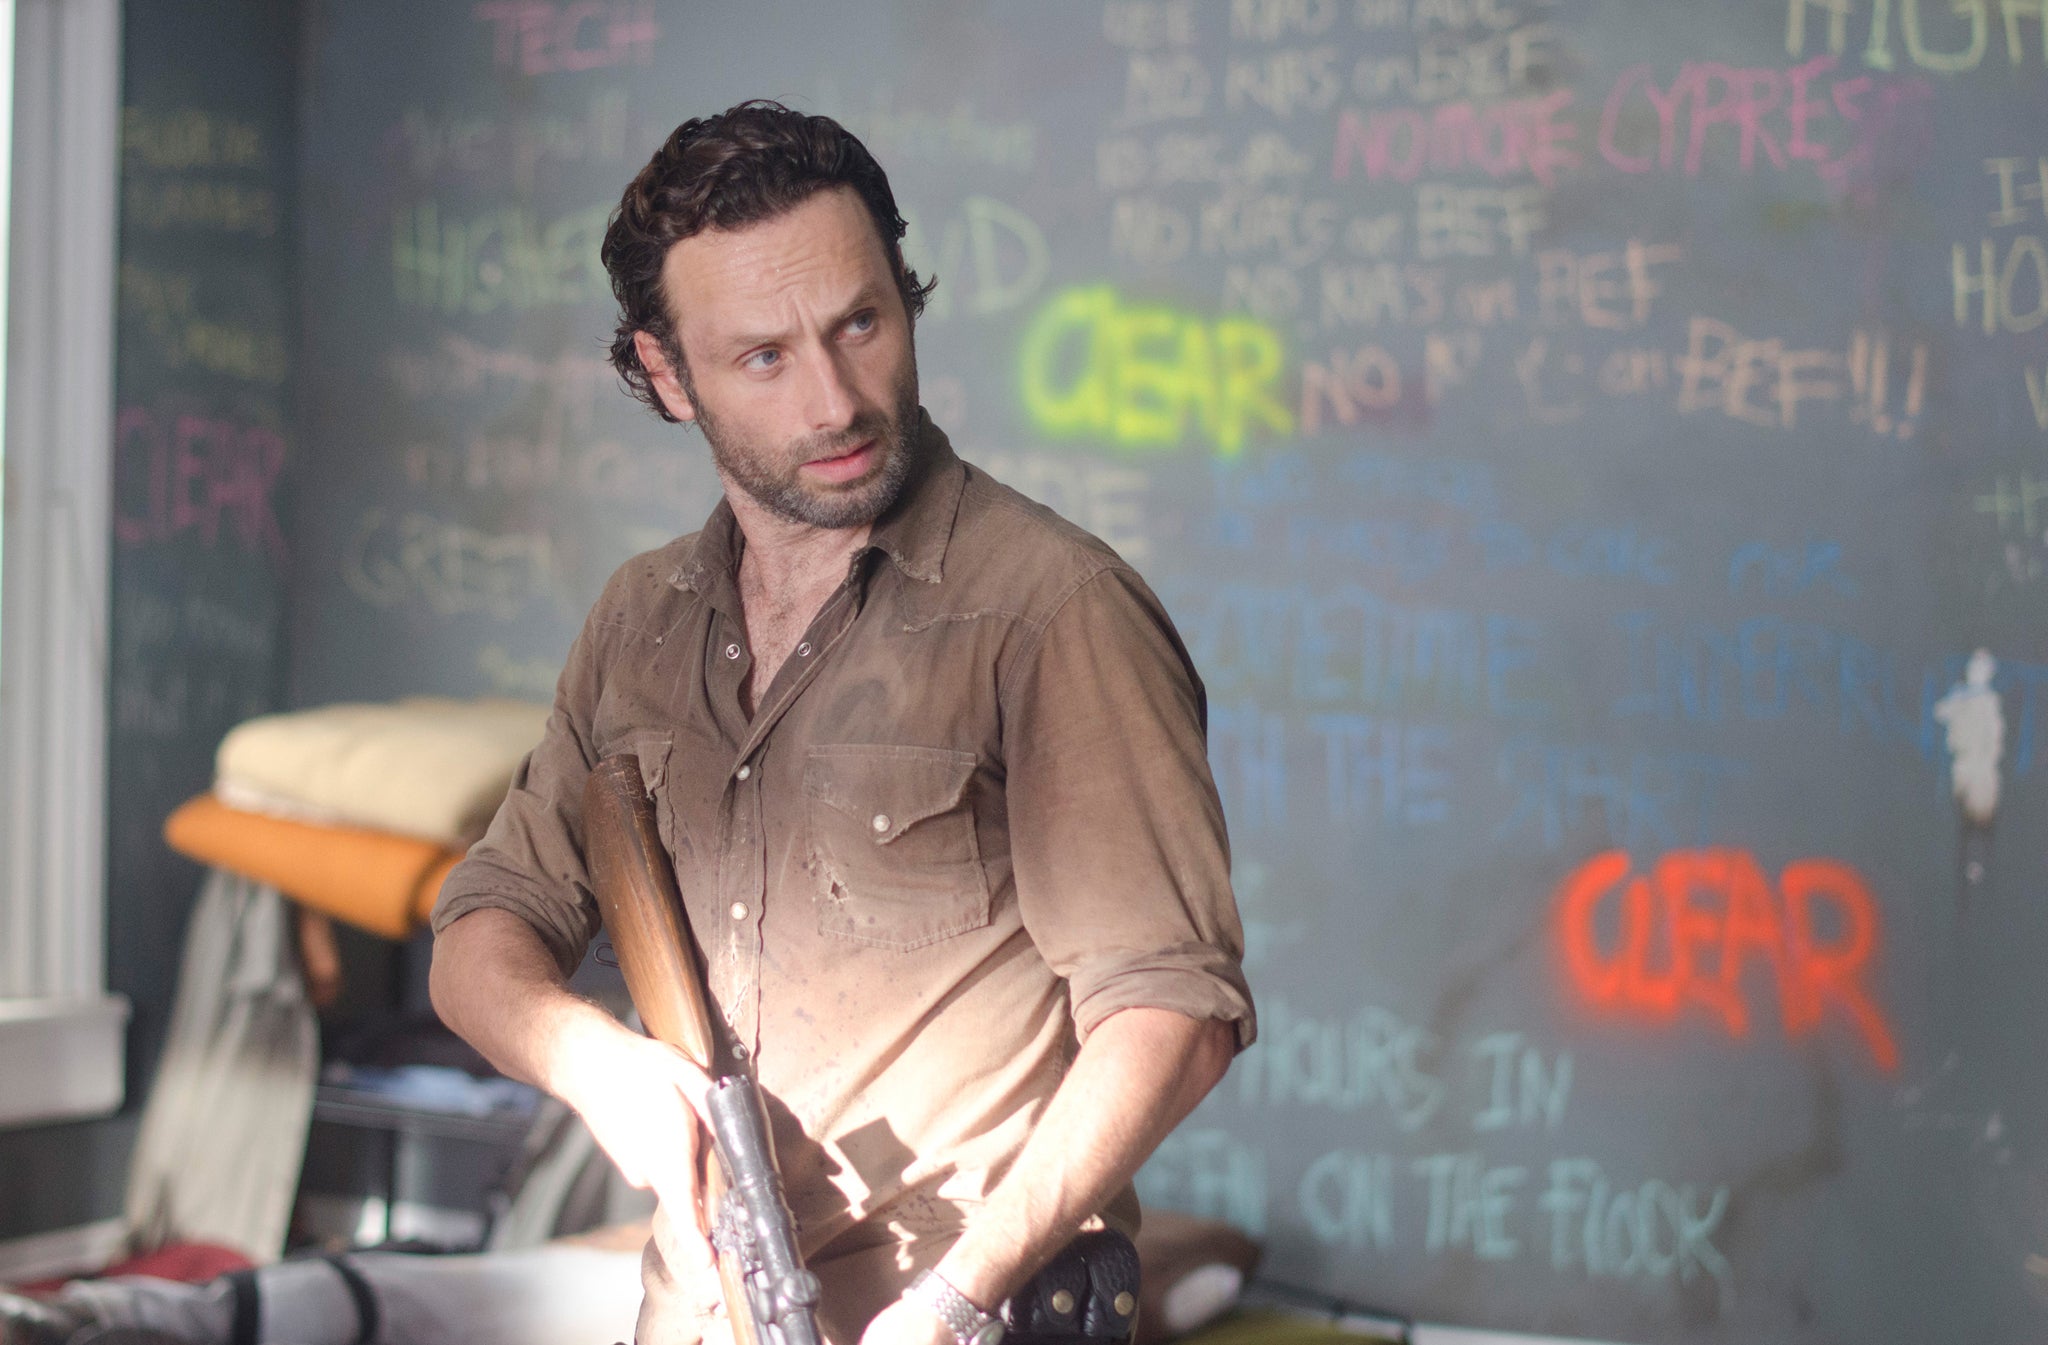 British actor Andrew Lincoln stars in The Walking Dead